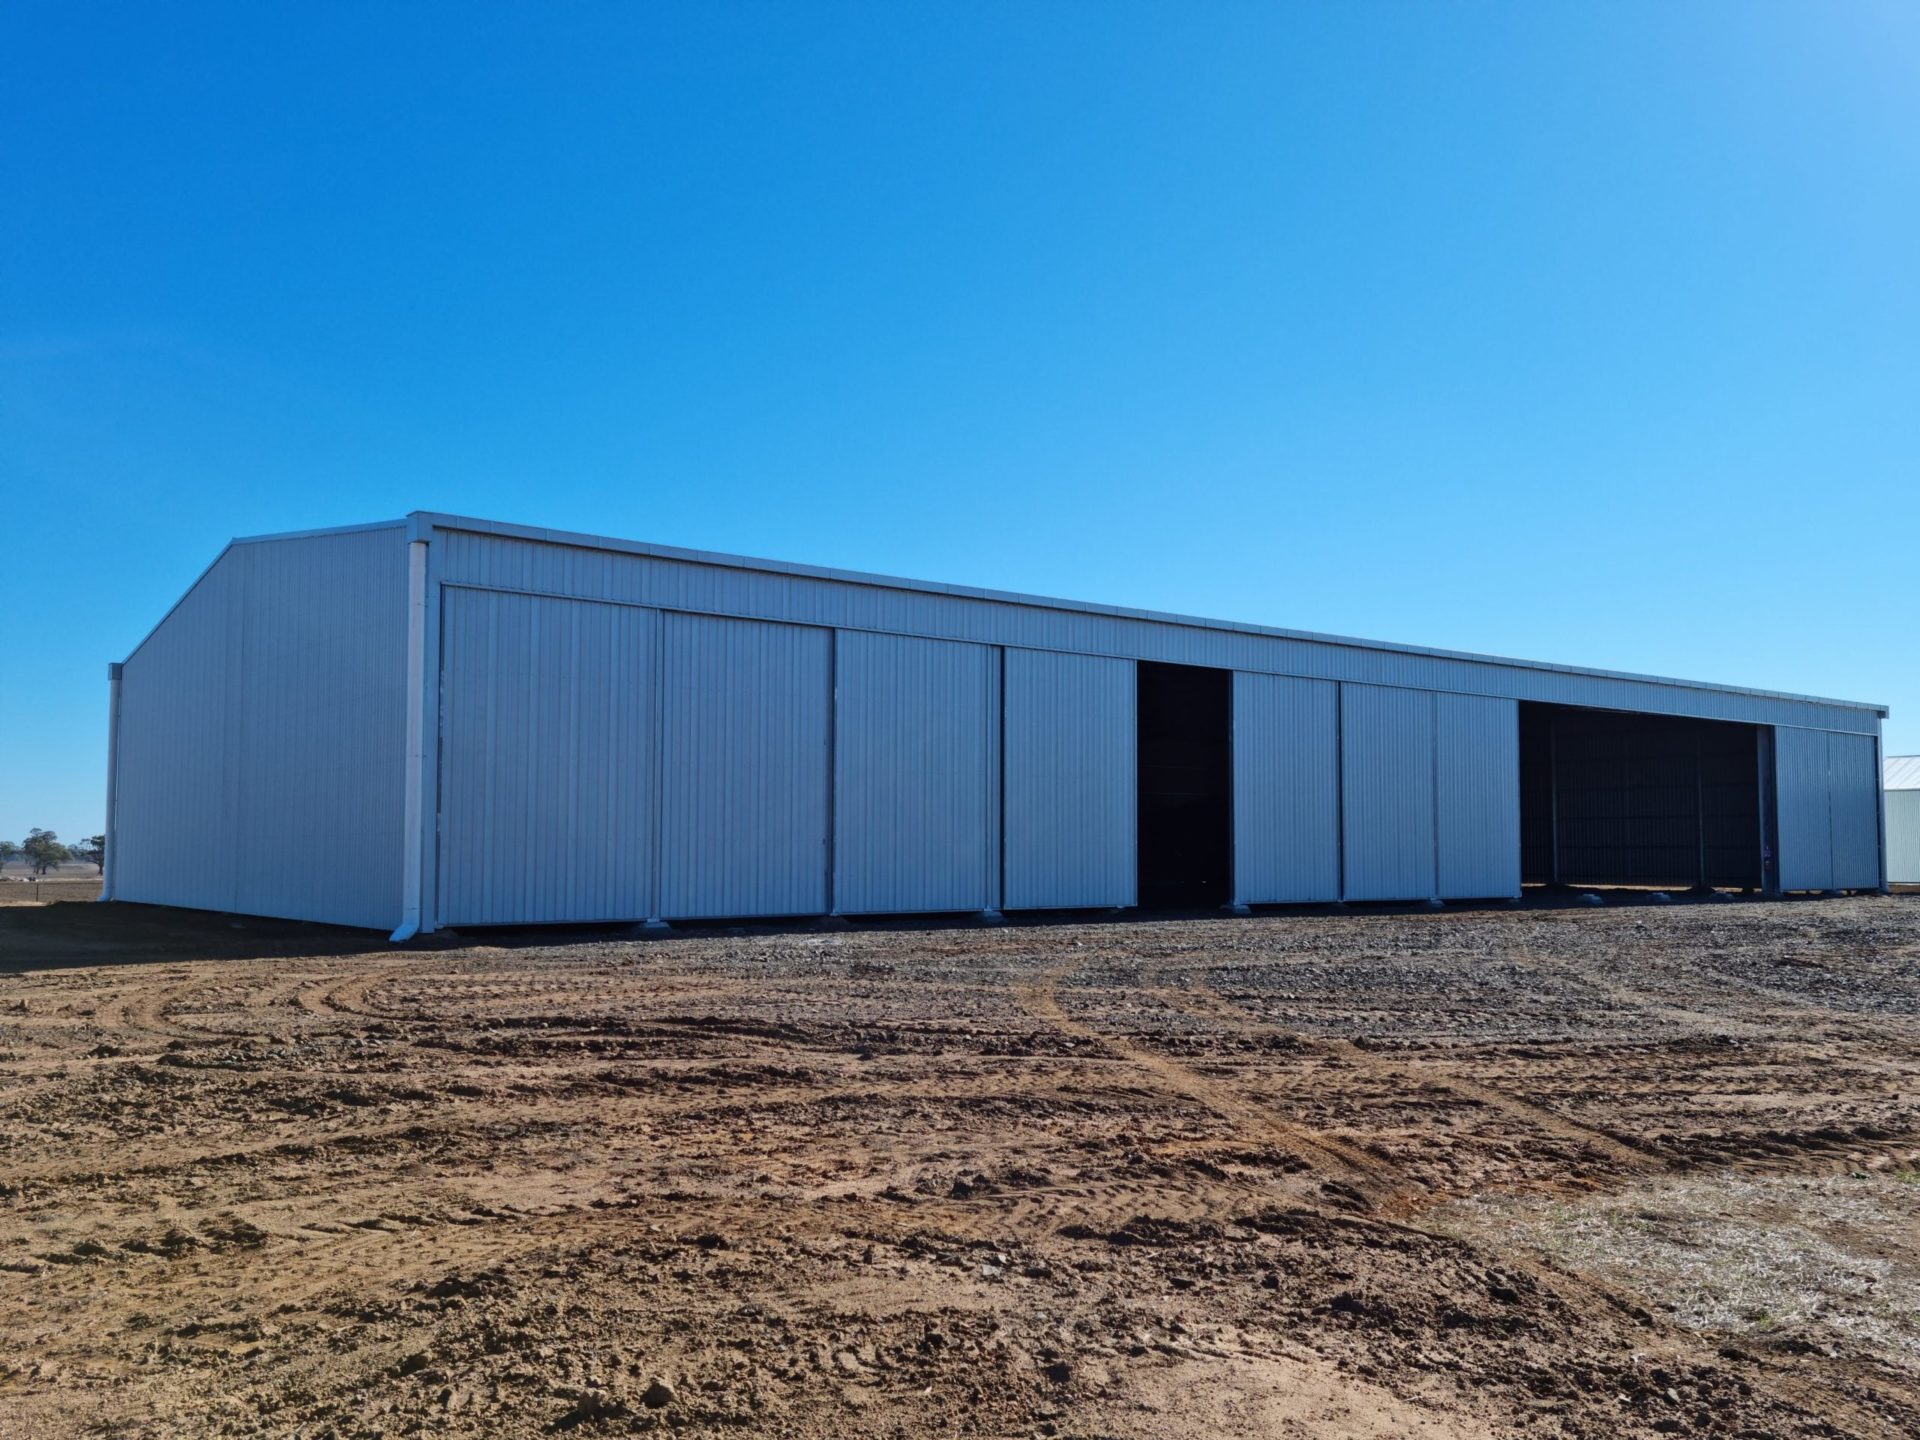 You are currently viewing 56m x 27m x 7m fully-enclosed machinery shed